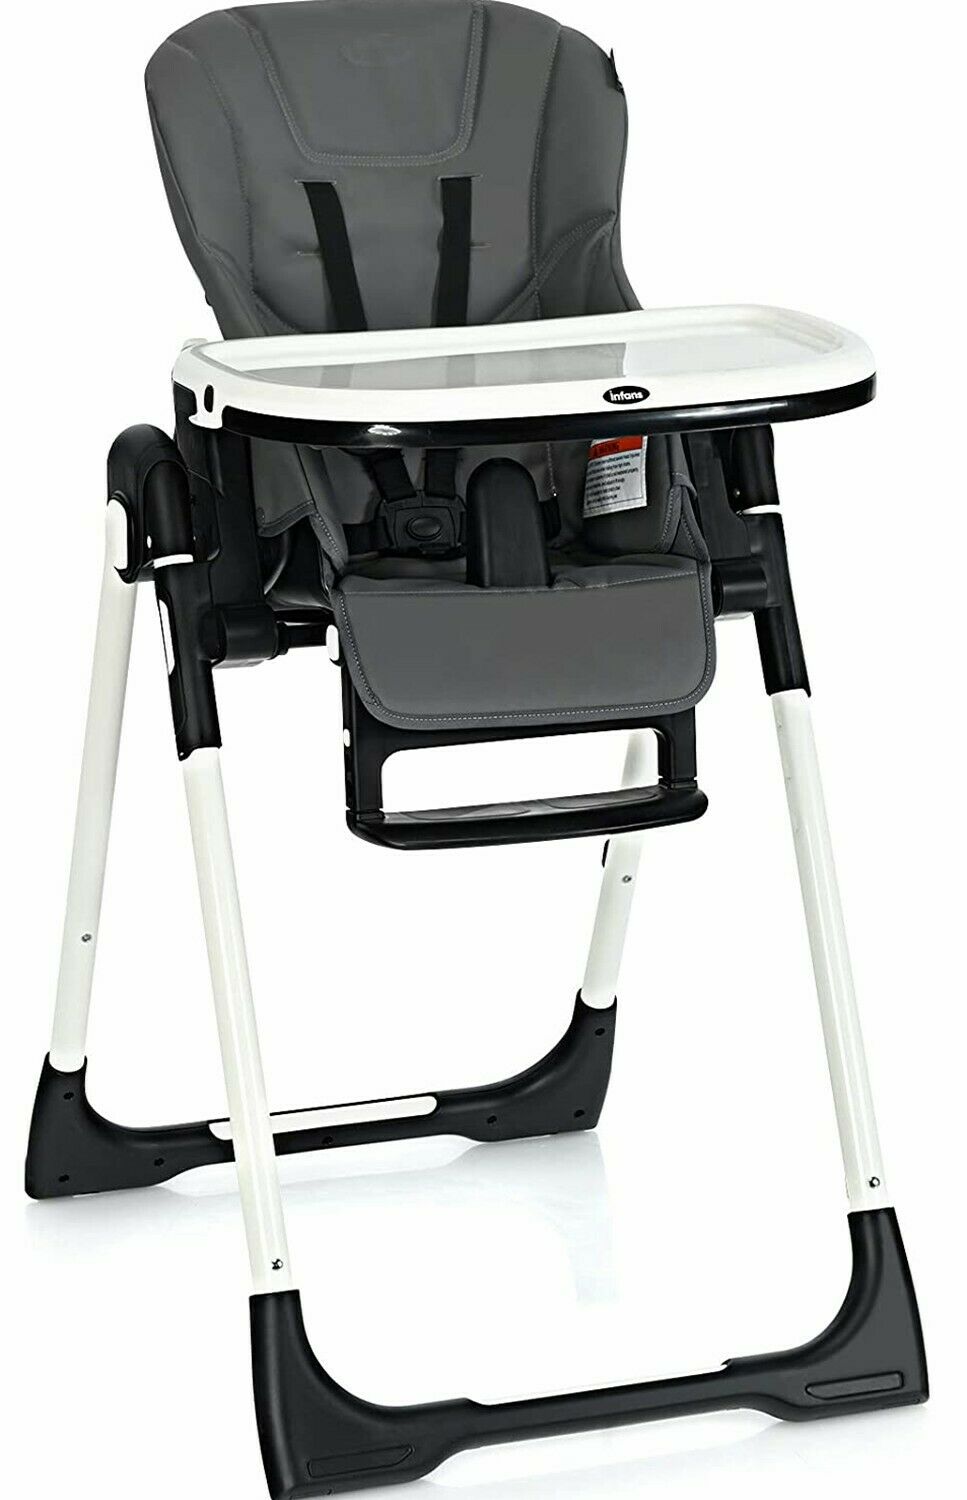 Baby Stroller with Car Seat Travel System High Chair Playard Infant Boy Combo